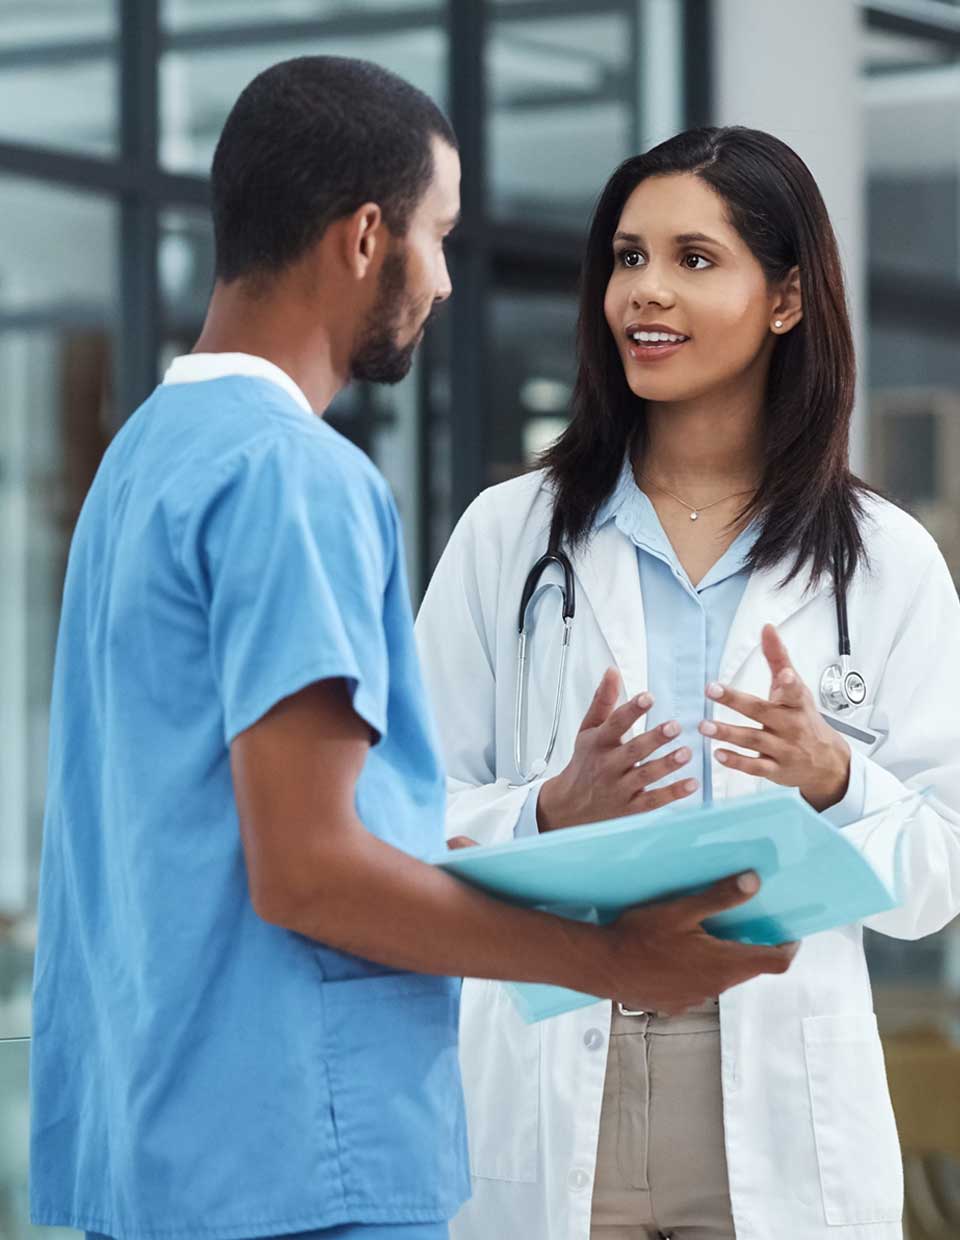 promo image for physician at a clinic discussing patient care with nurse